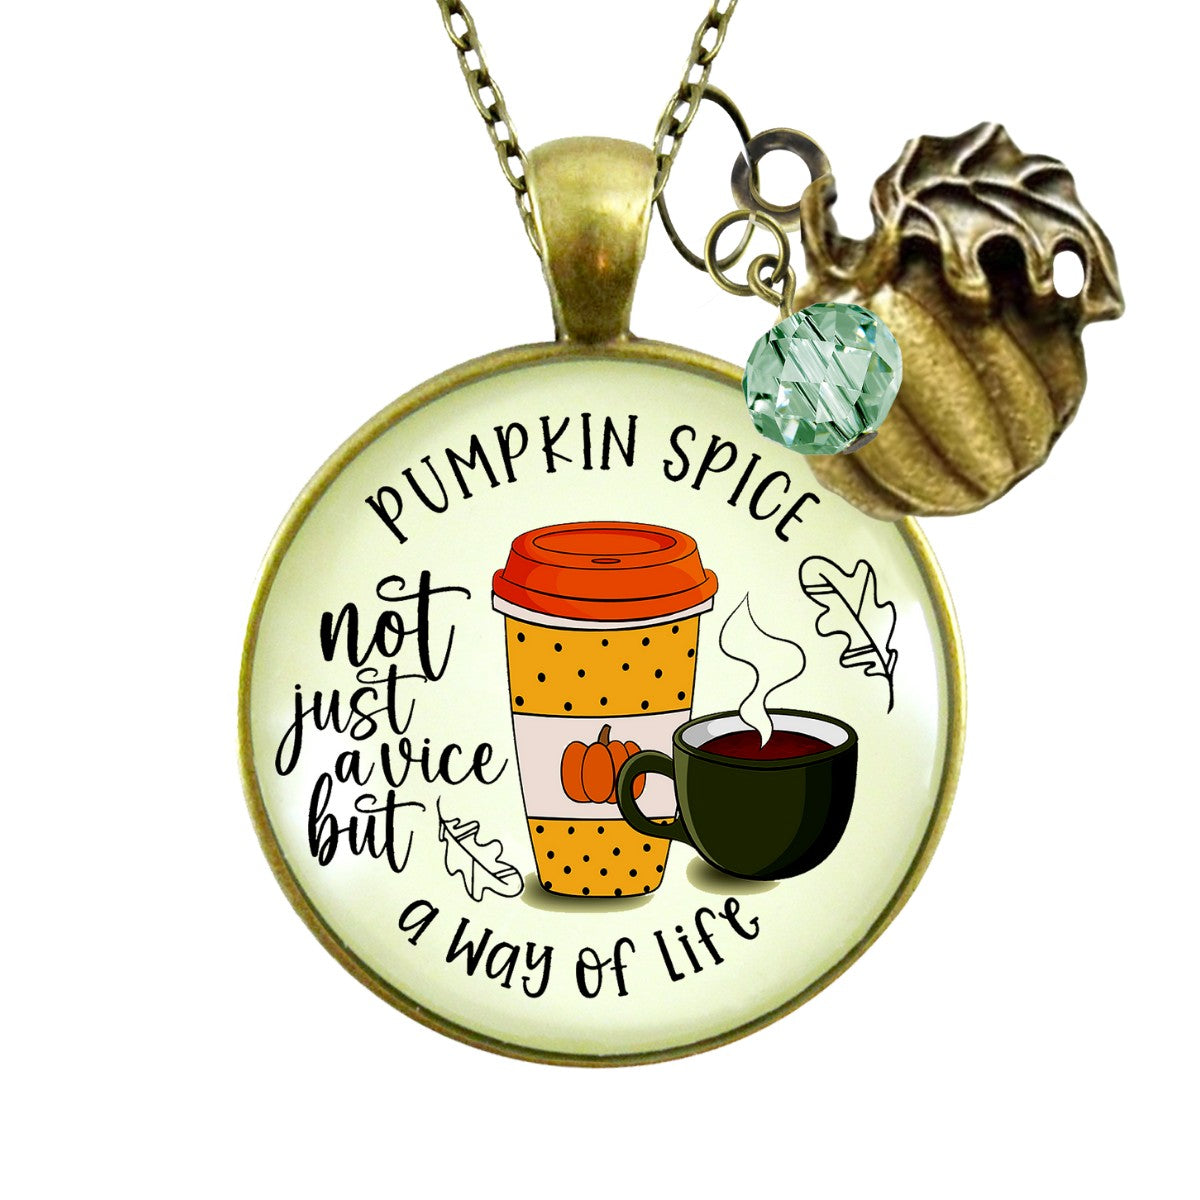 Pumpkin Spice Necklace Funny Quote Not a Vice, Way of Life Autumn PSL Coffee Latte Lover Costume Fashion Fall Jewelry For Women  Necklace - Gutsy Goodness Handmade Jewelry